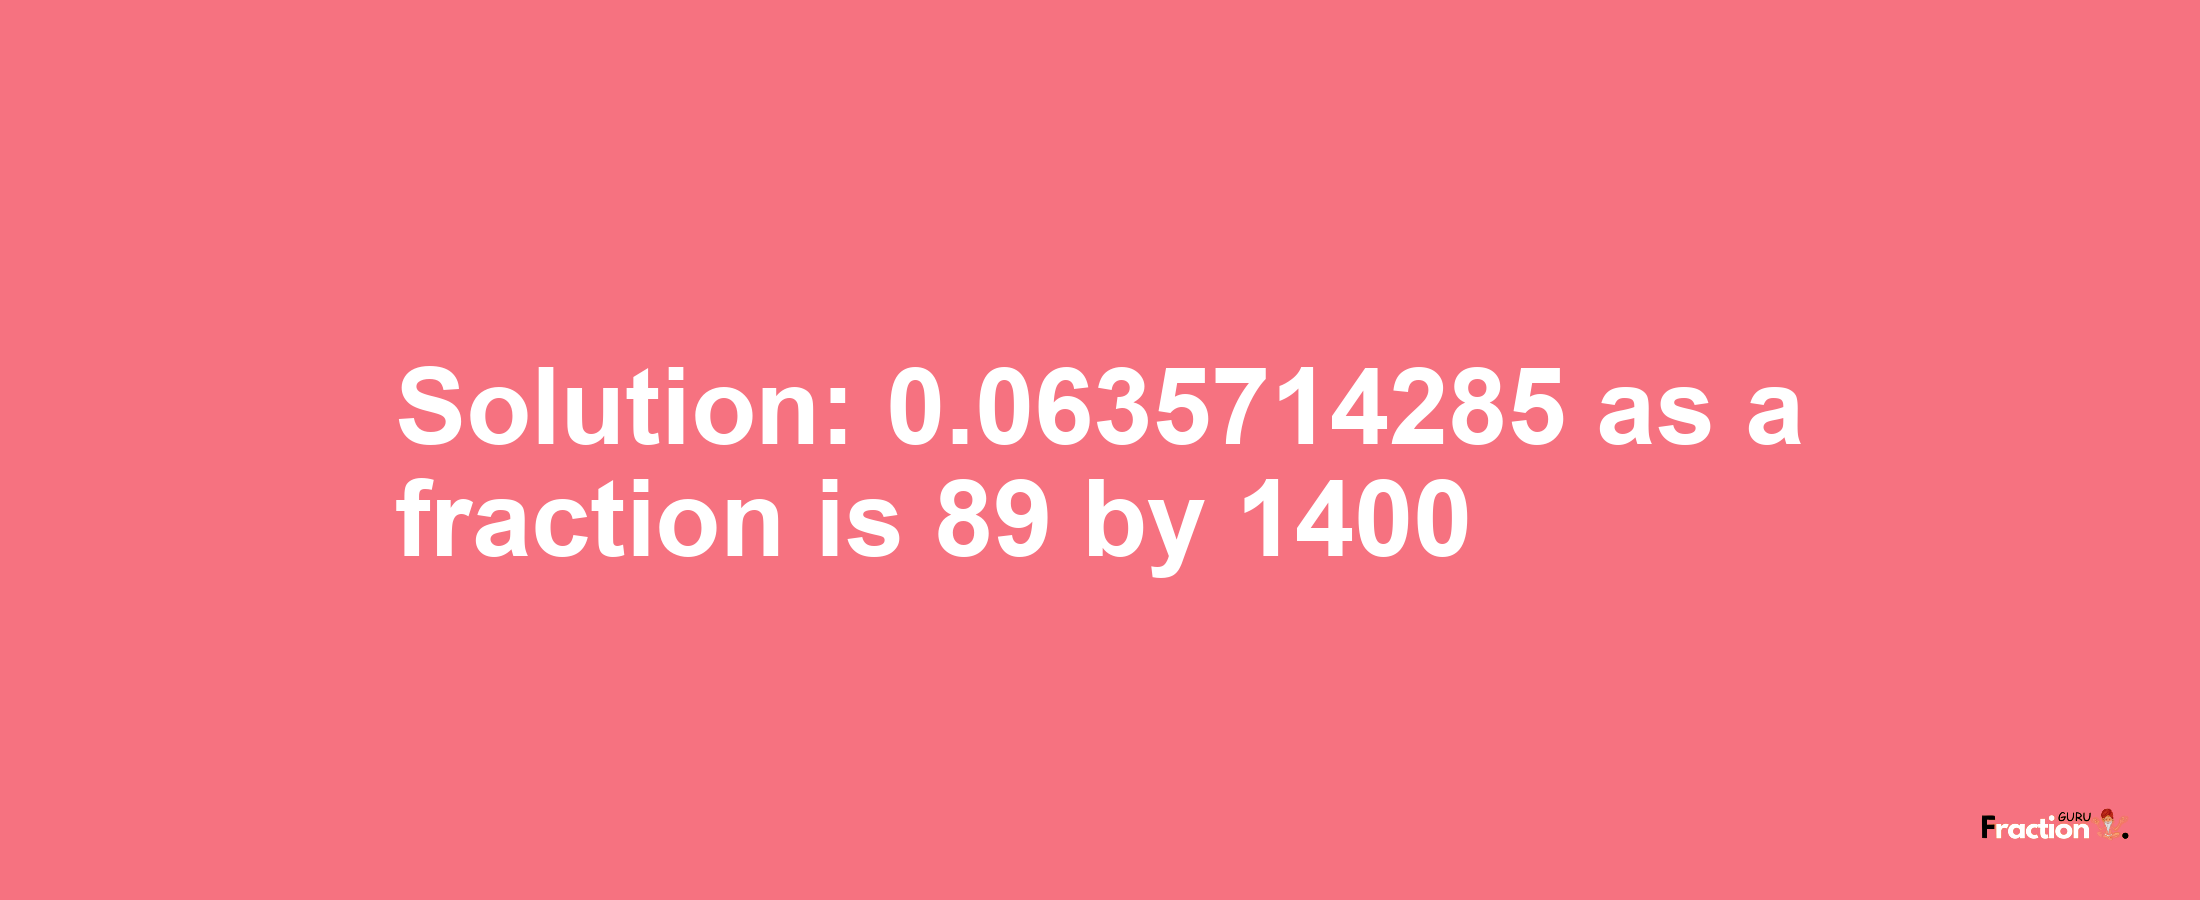 Solution:0.0635714285 as a fraction is 89/1400